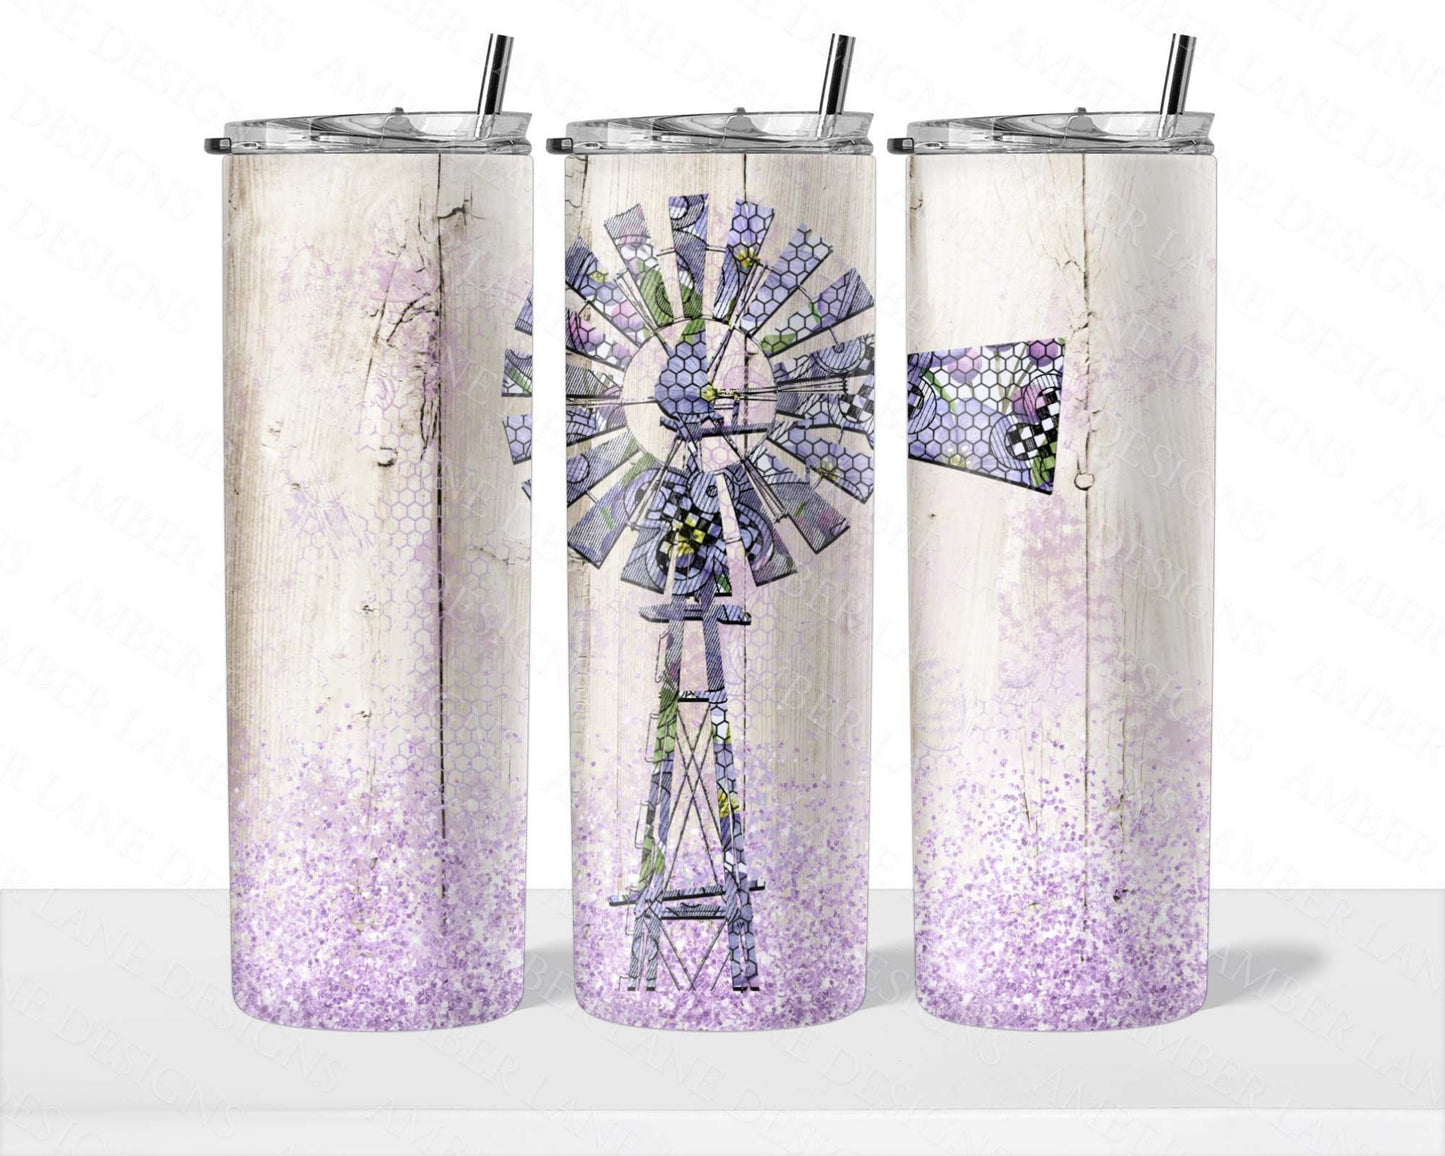 Whimsical Lavender Breeze: 20oz Skinny Tumbler Windmill Fields of Tranquility Provencal Charm Purple Twilight Aromatic Countryside Dreams